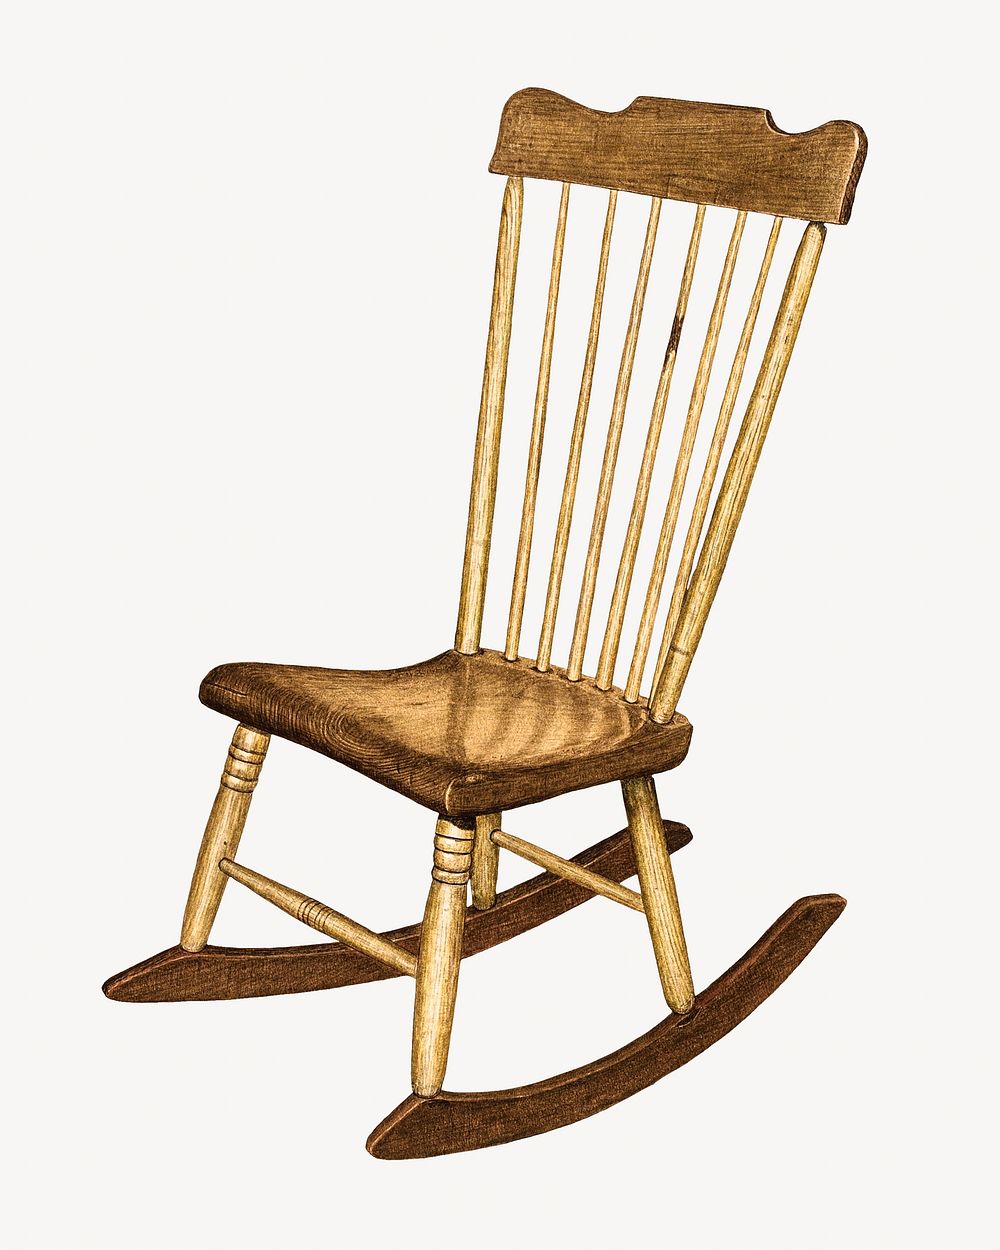 Wooden rocking chair on white background